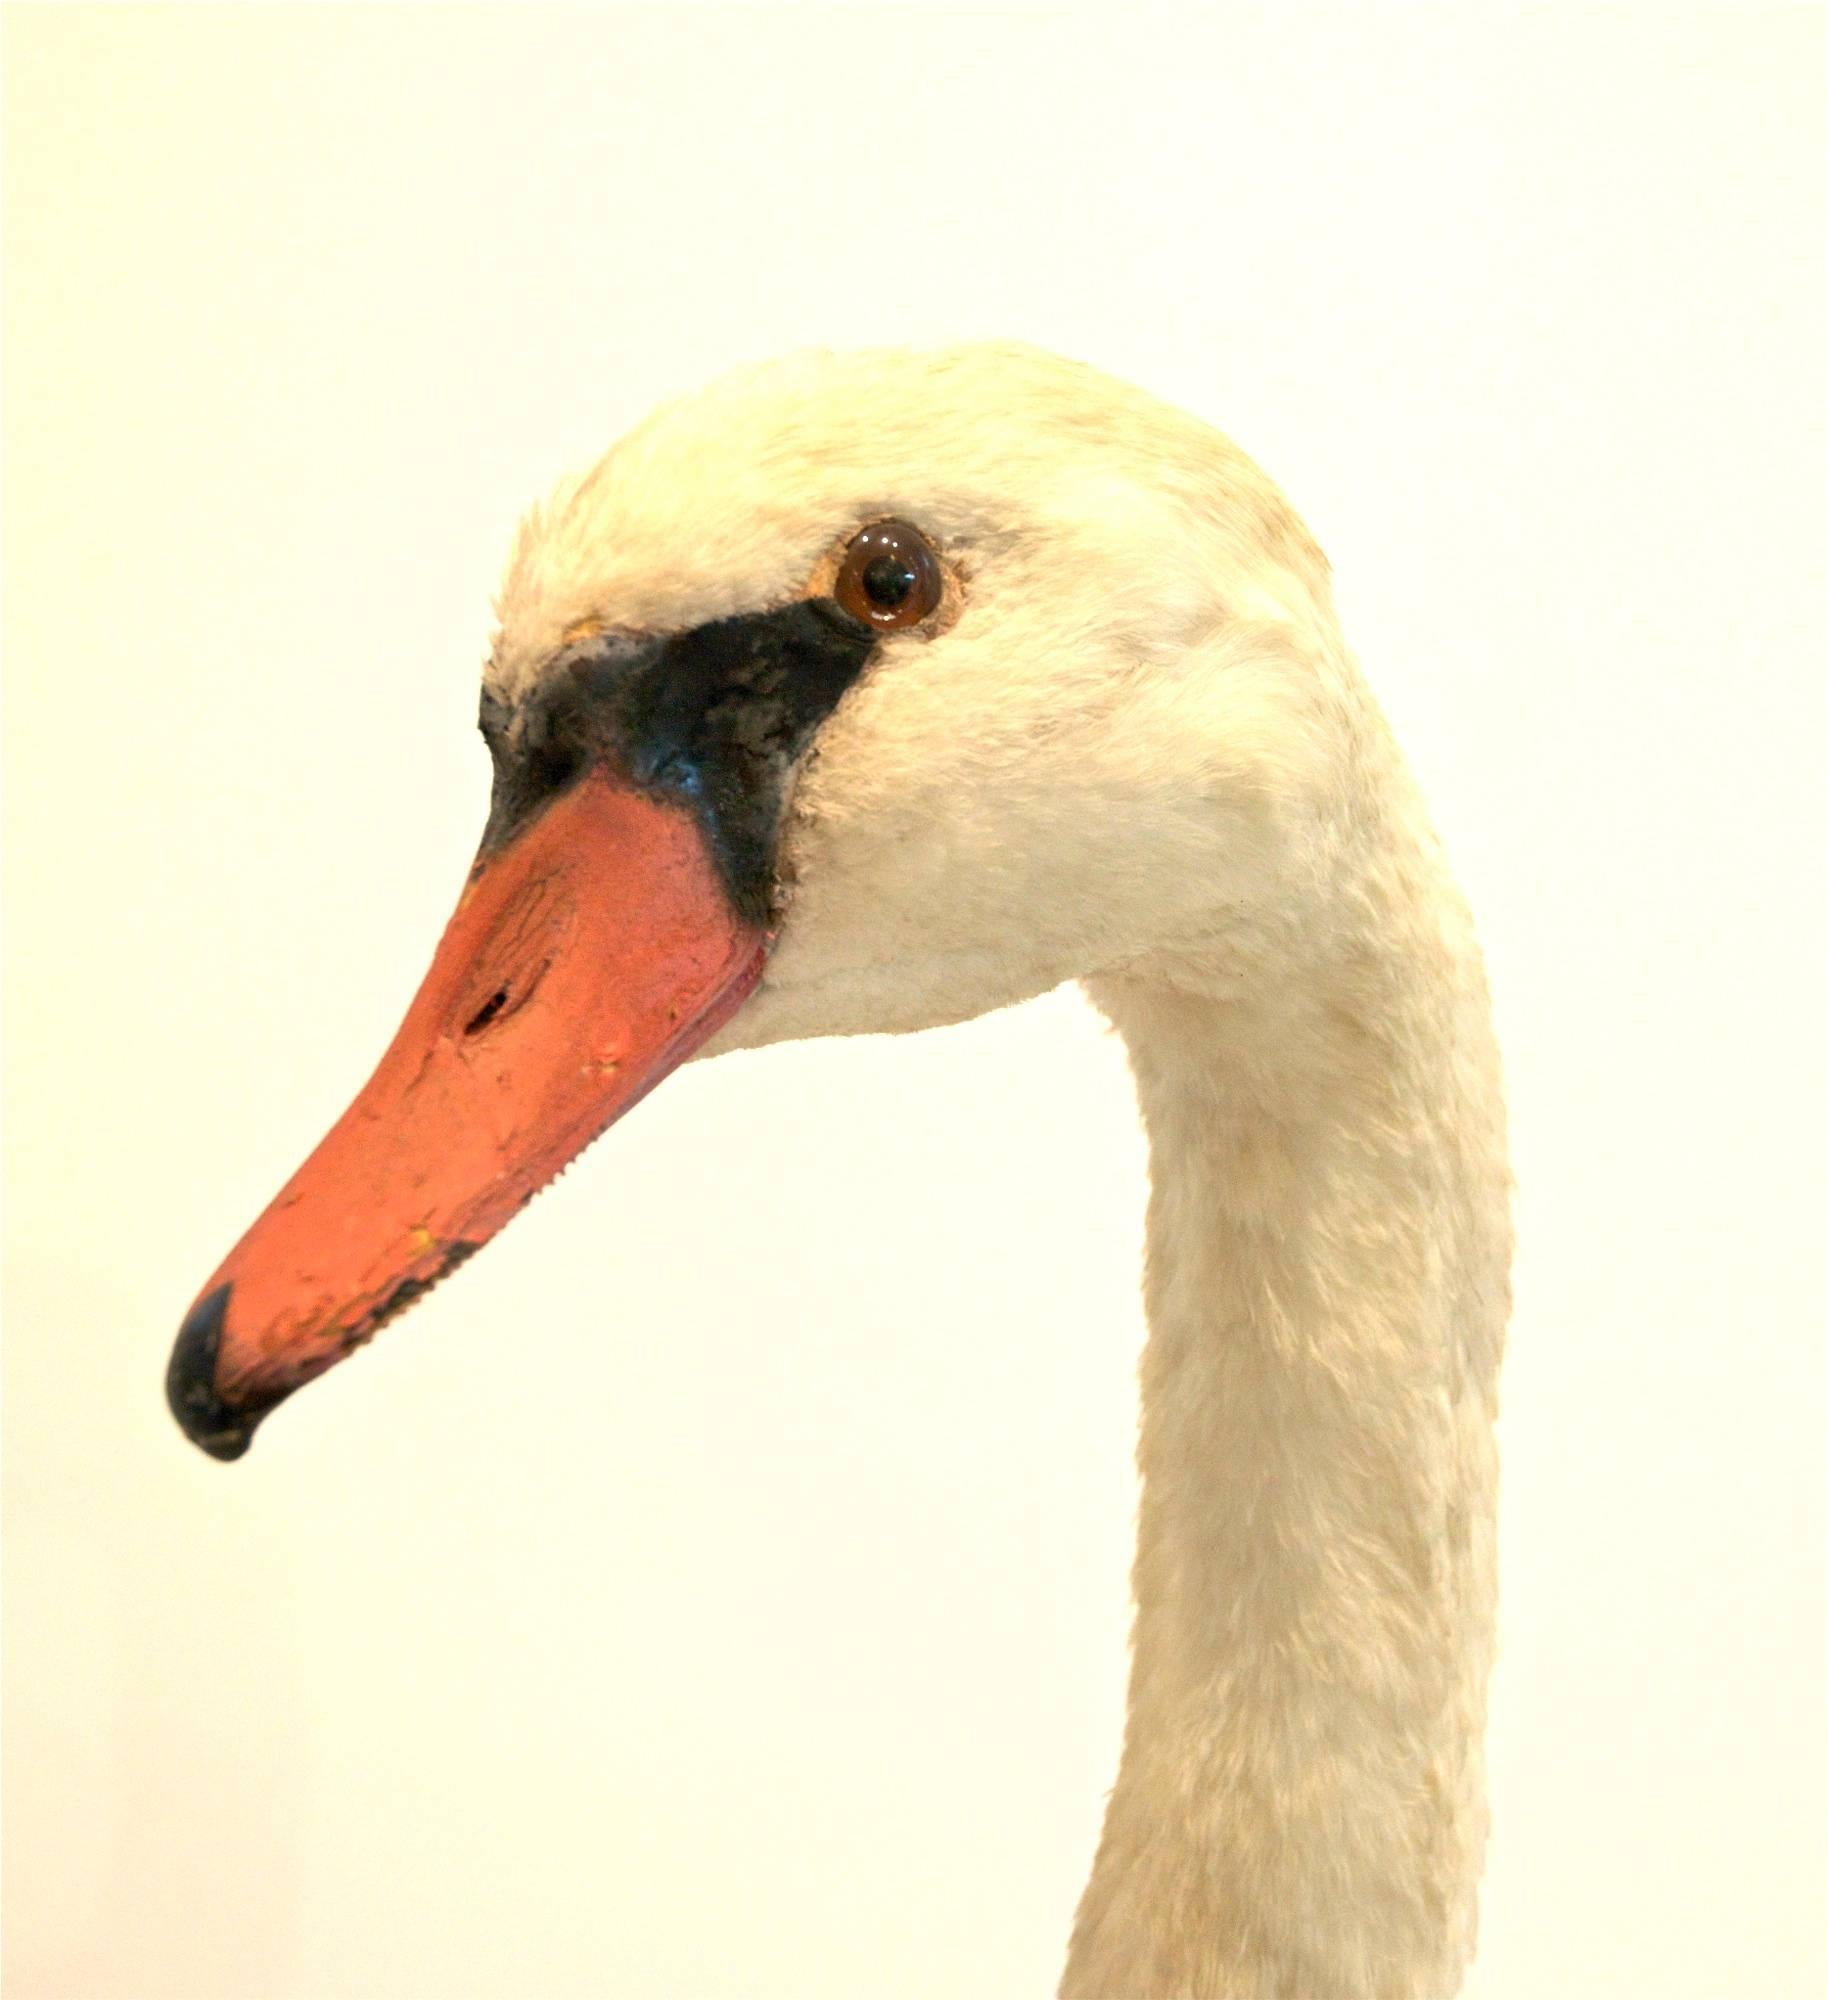 A gentle and regal looking mute swan taxidermied and mounted upon a good looking chunk of driftwood. The most likely female specimen of 